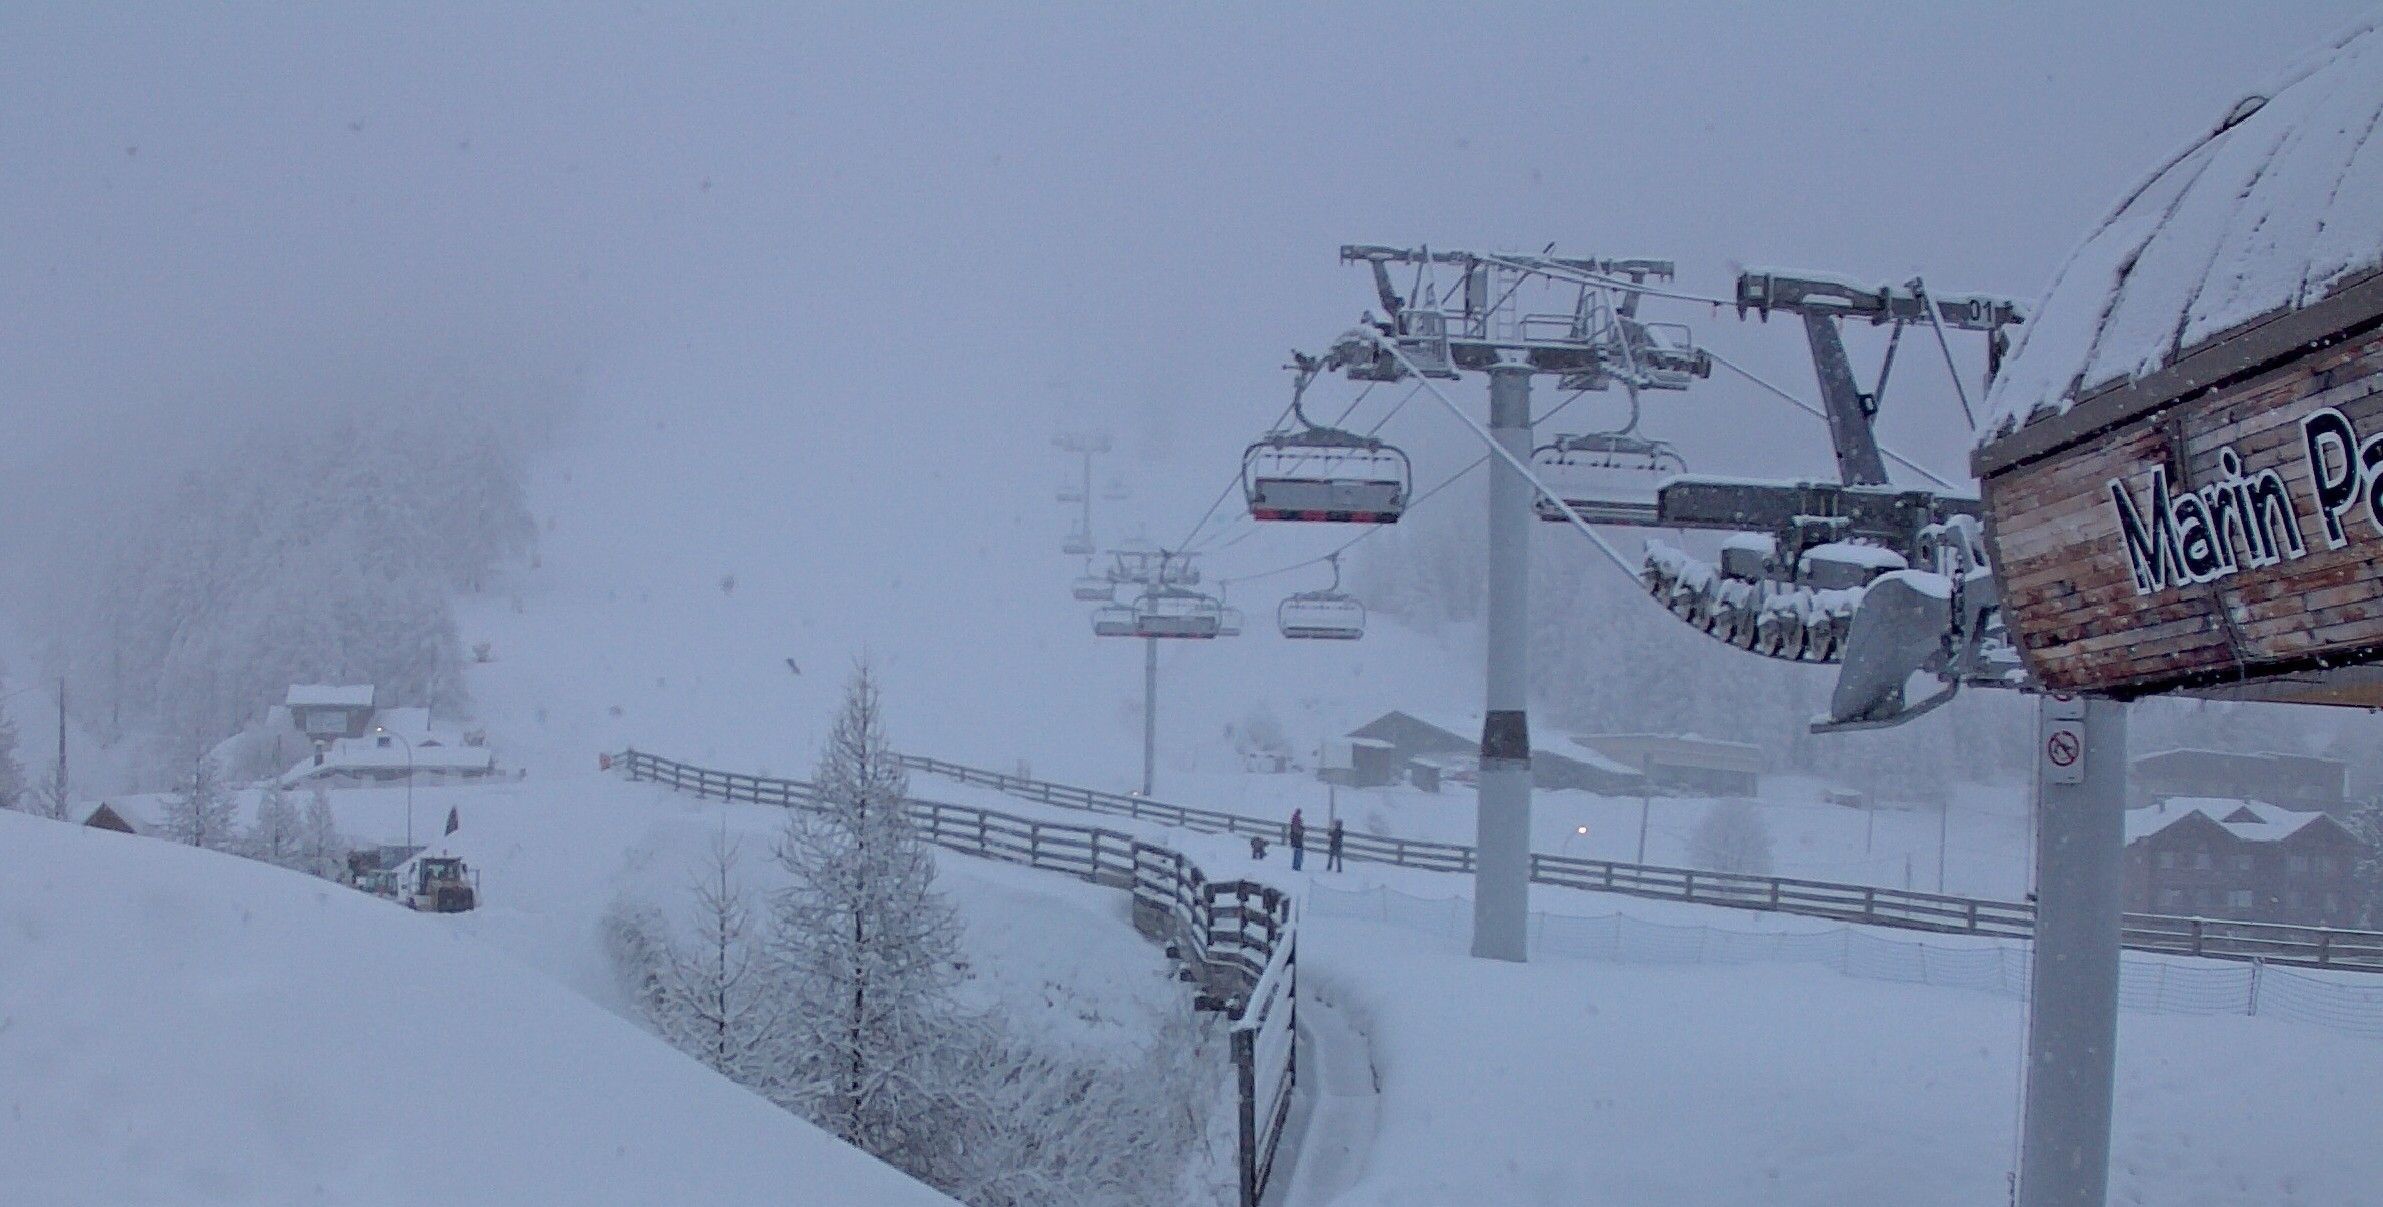 It's already snowing in the southern French Alps (source: valdallos.com)